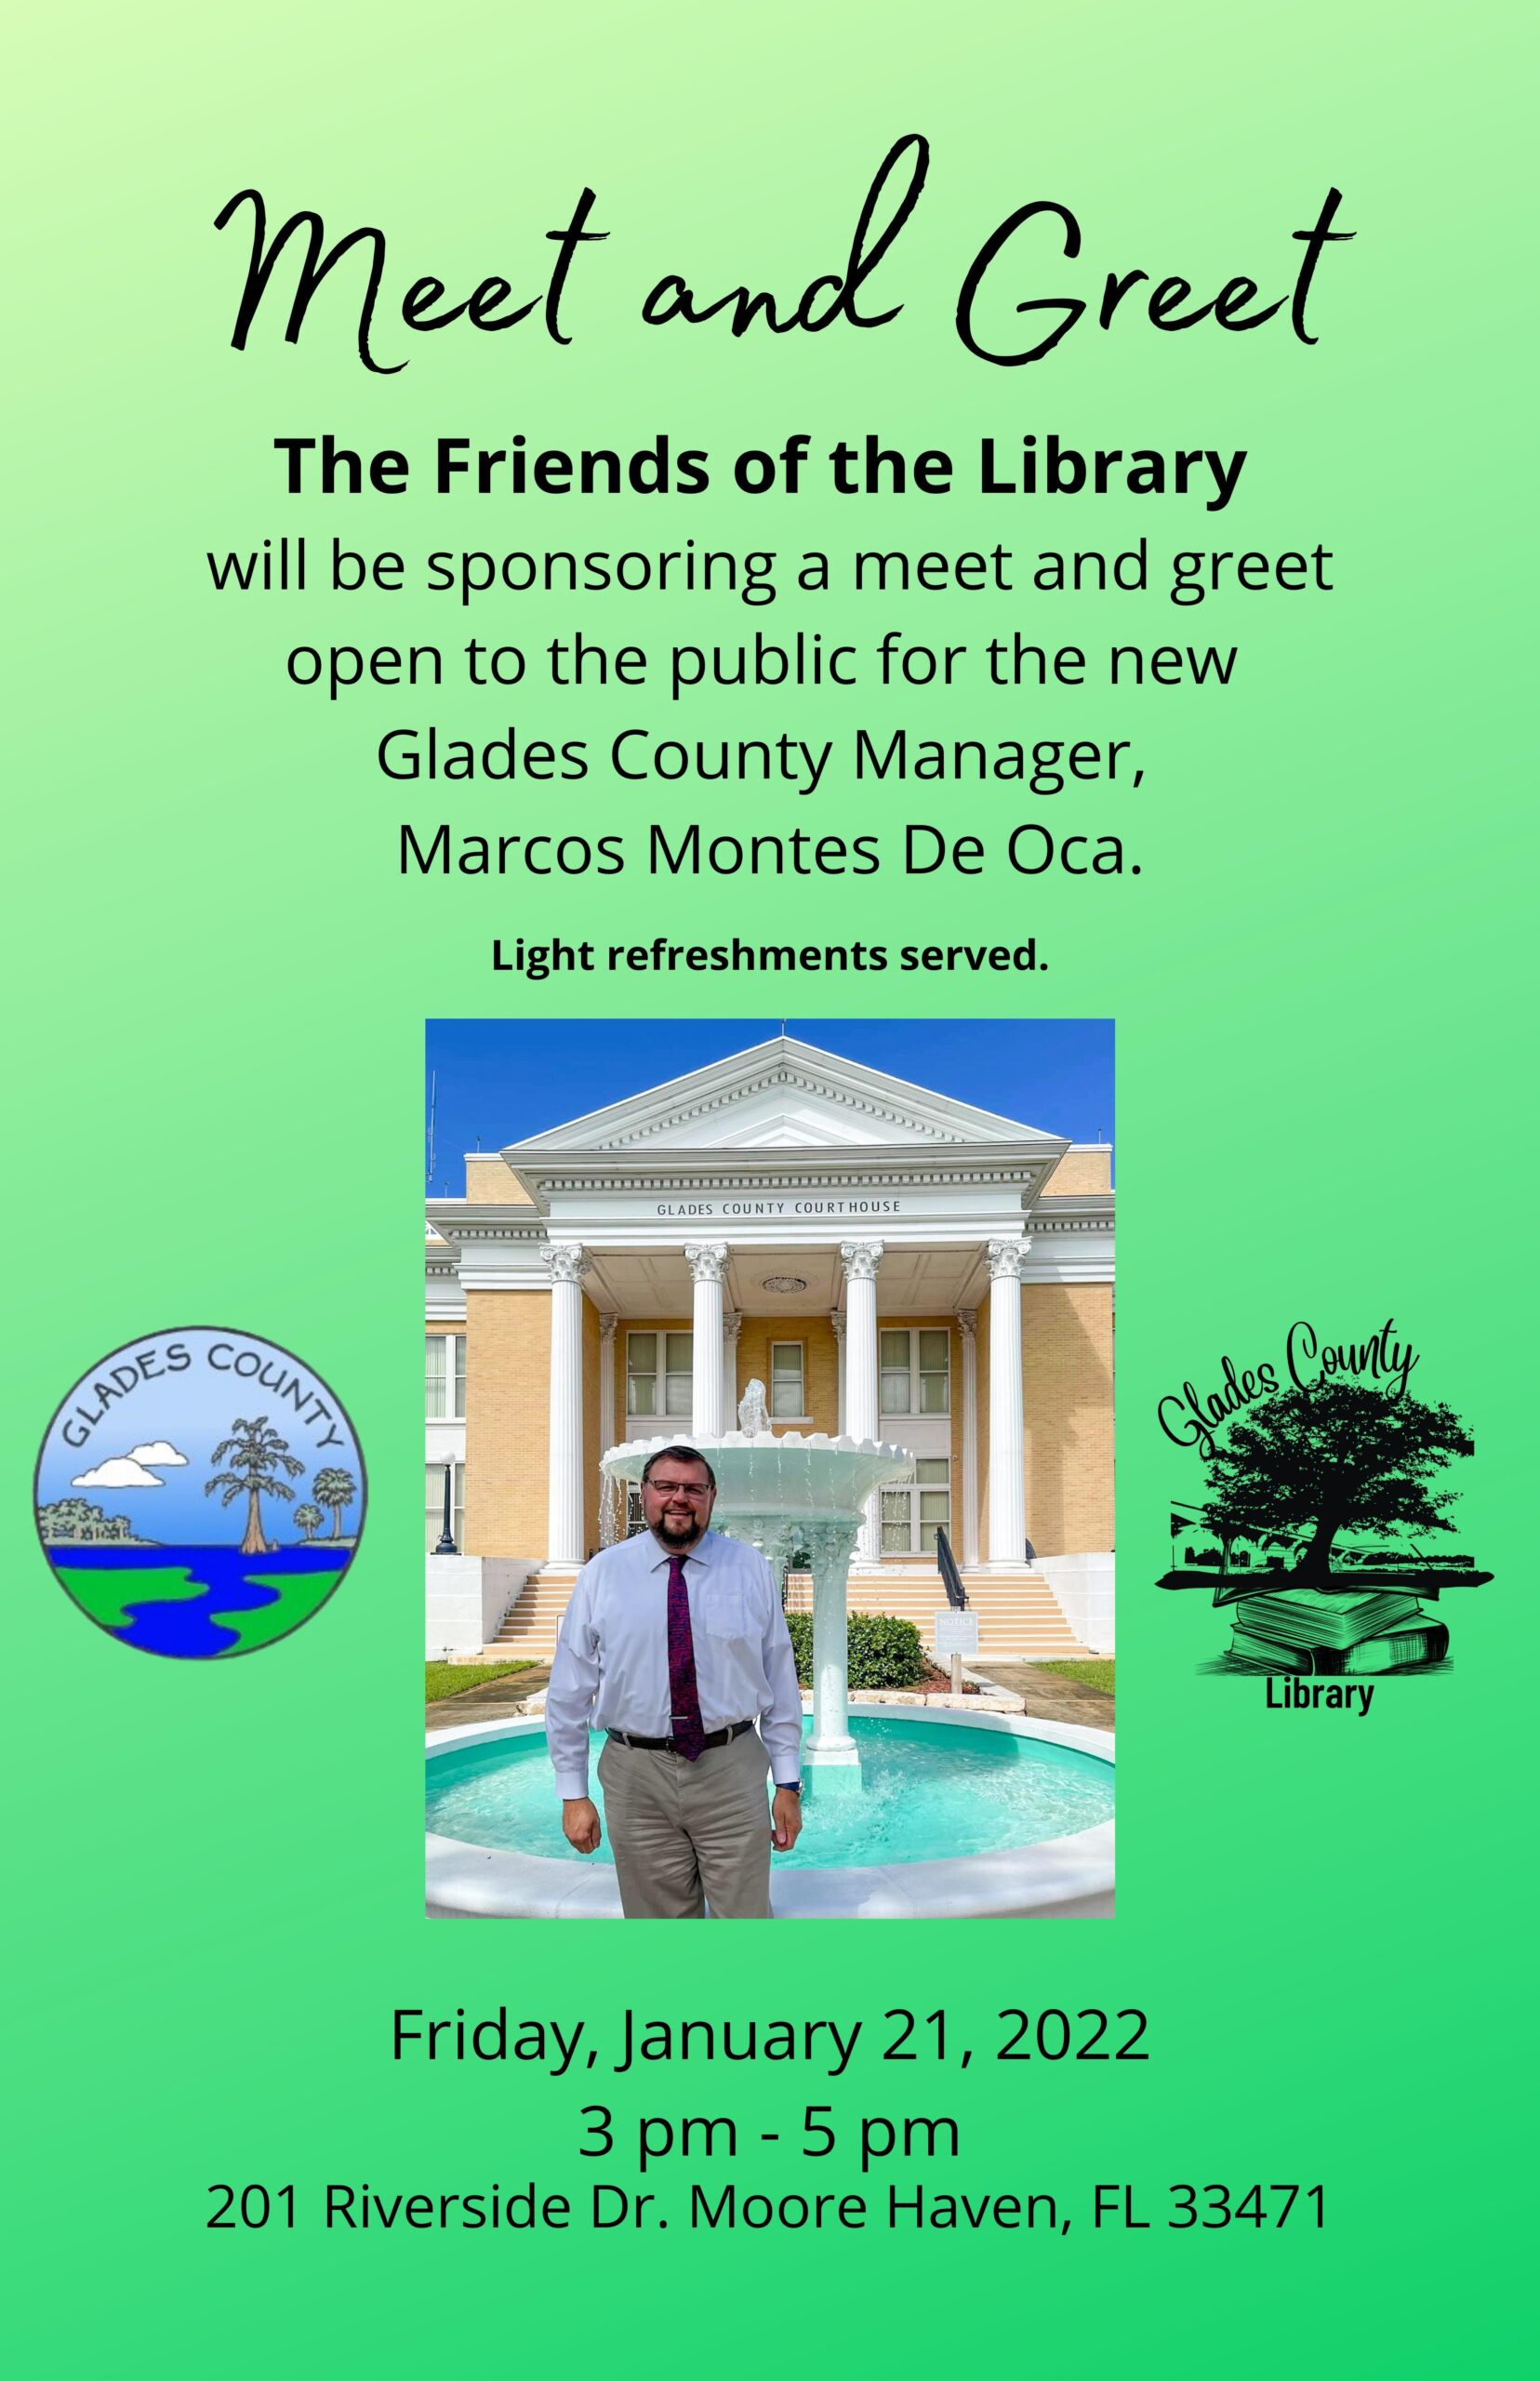 Glades County library and Friends of the Library are hosting a meet and greet for the new Glades County Manager on January 21 3 p.m. to 5 p.m.